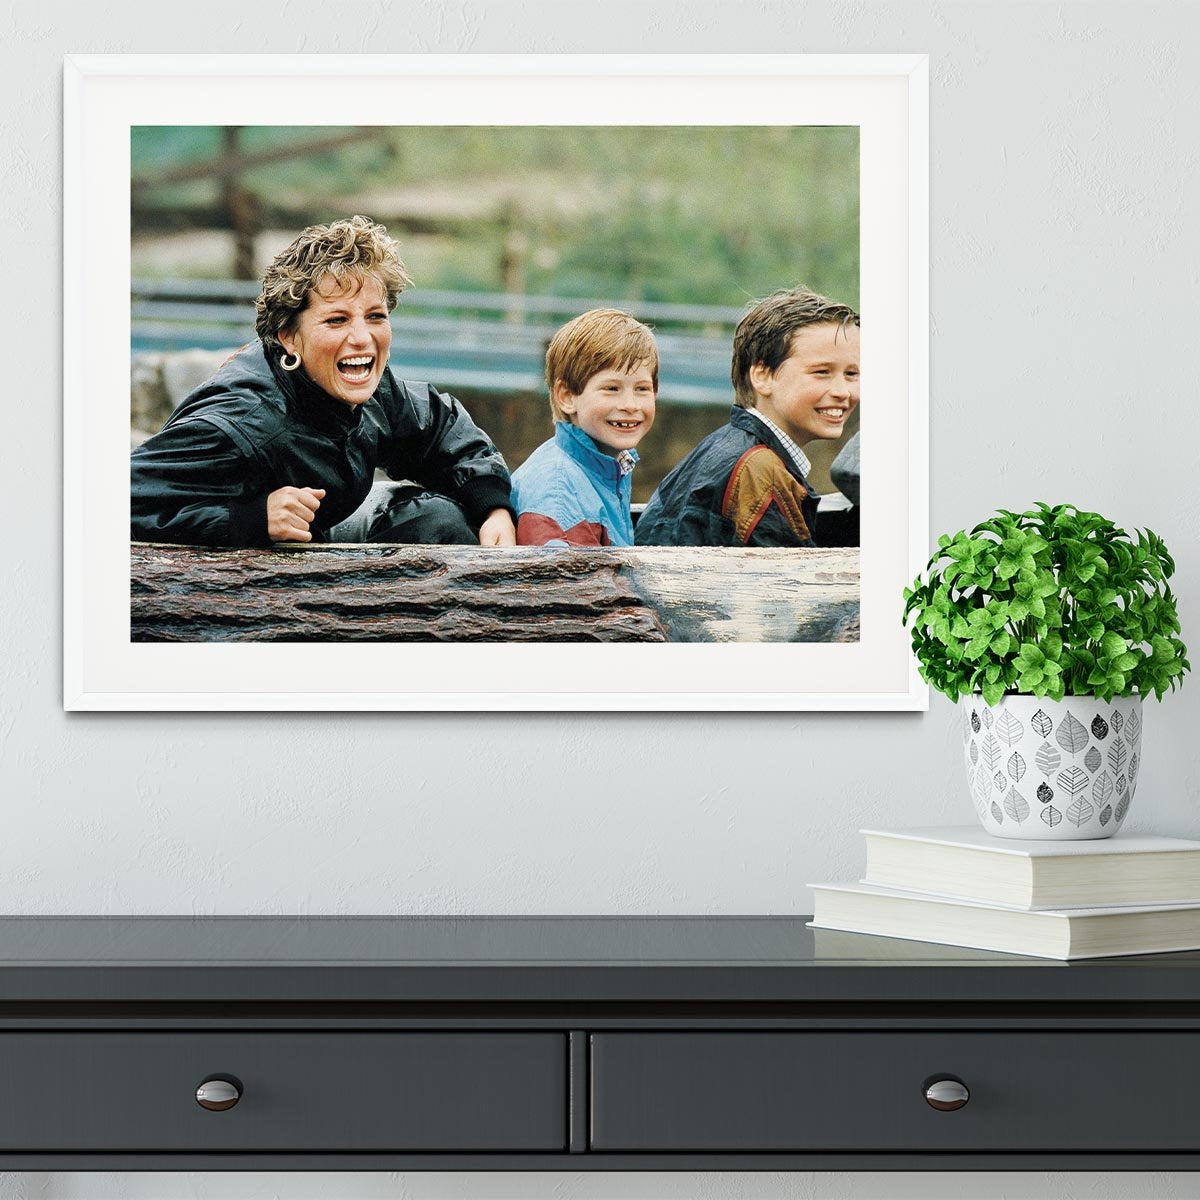 Princess Diana with Prince William and Prince Harry on ride Framed Print - Canvas Art Rocks - 5